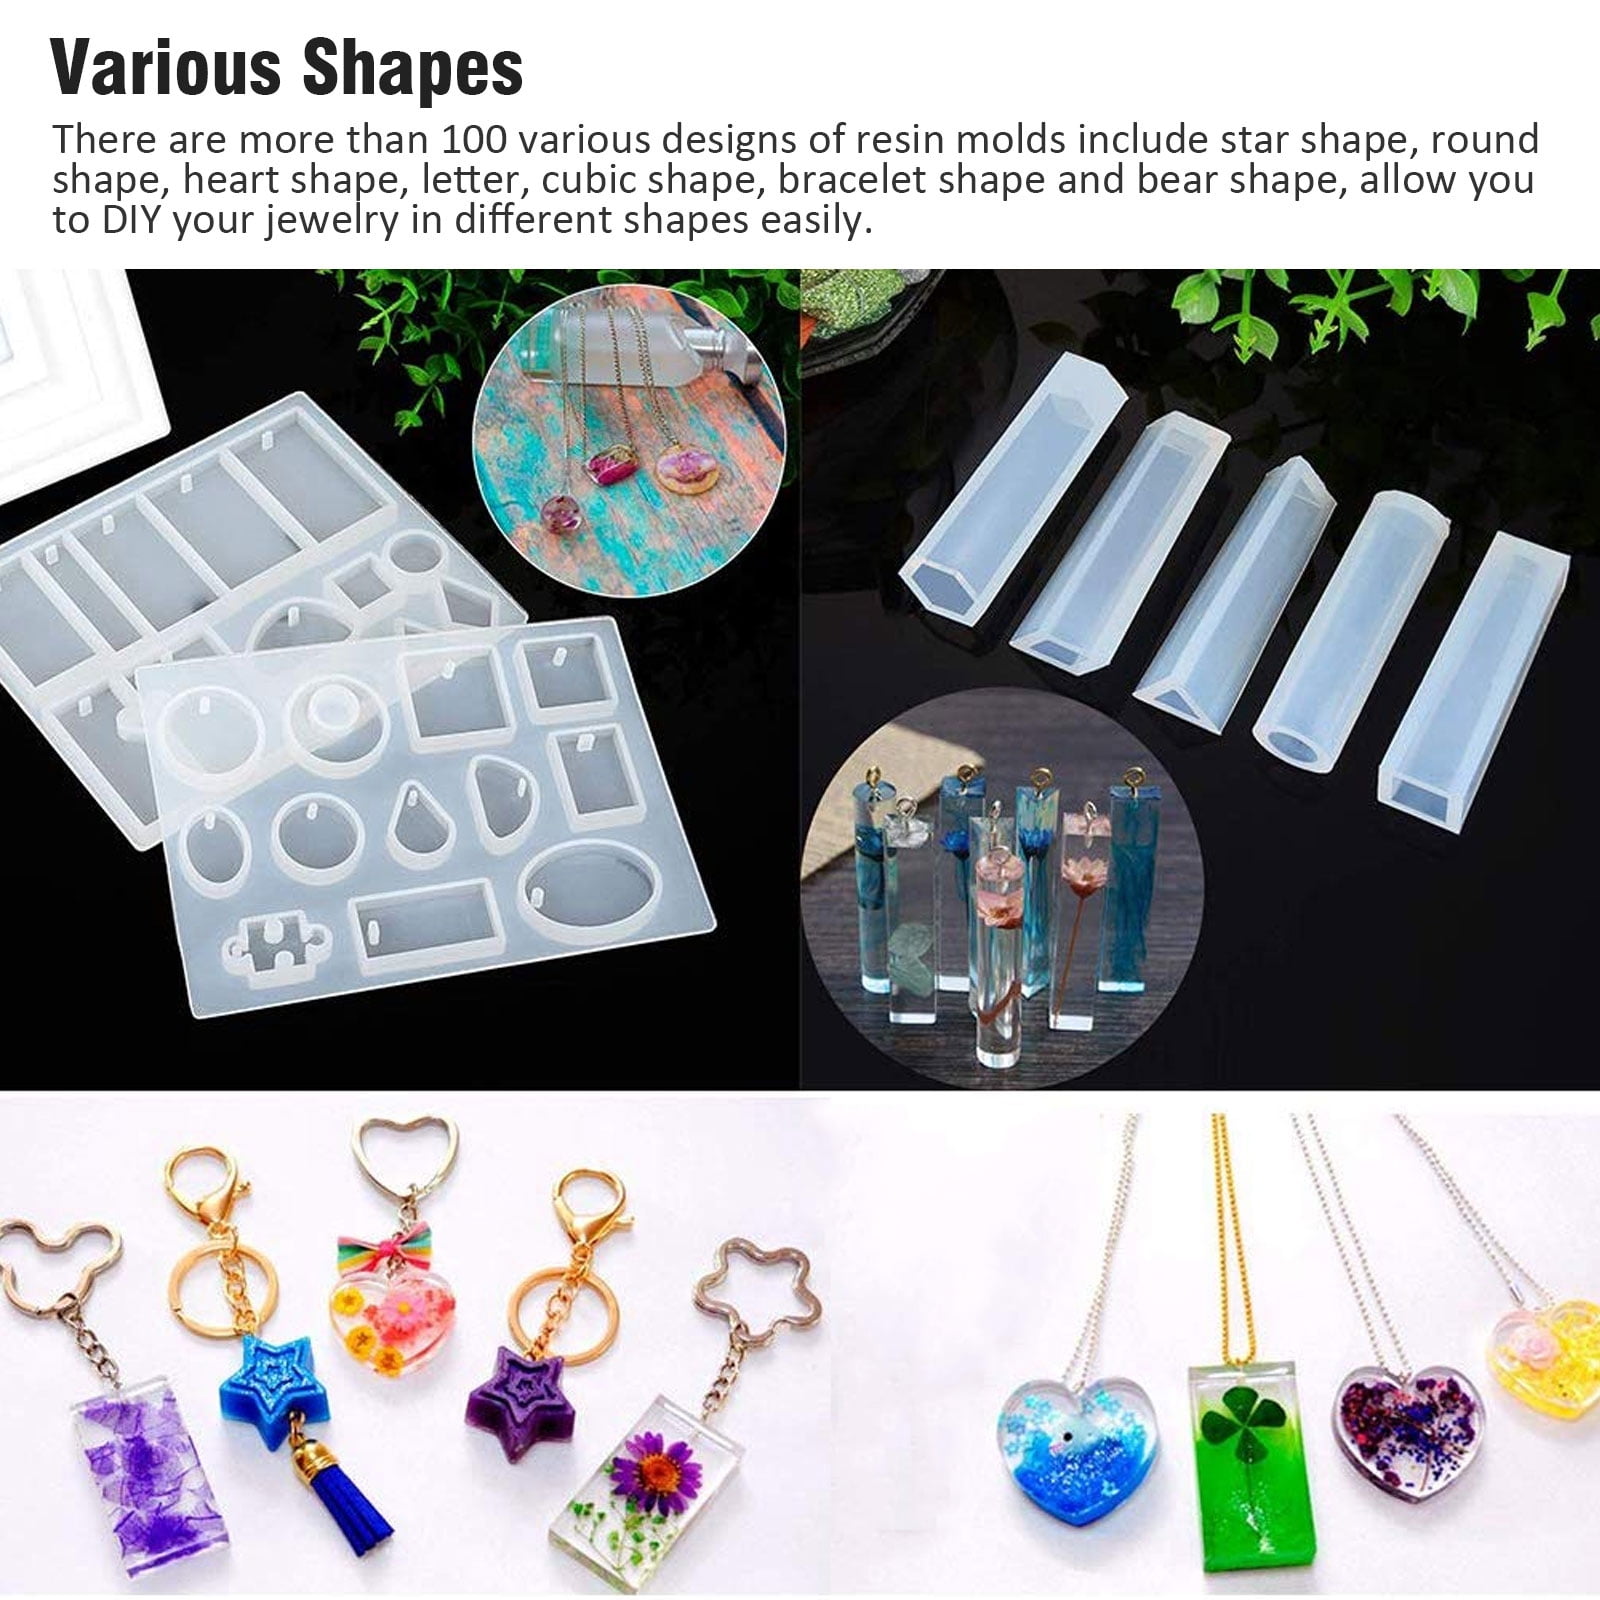 EEEkit Resin Molds, 229pcs Silicone Resin Casting Molds and Tools Kit for  DIY Jewelry Resin Craft Making, Epoxy Resin Making Kit for Resin Casting